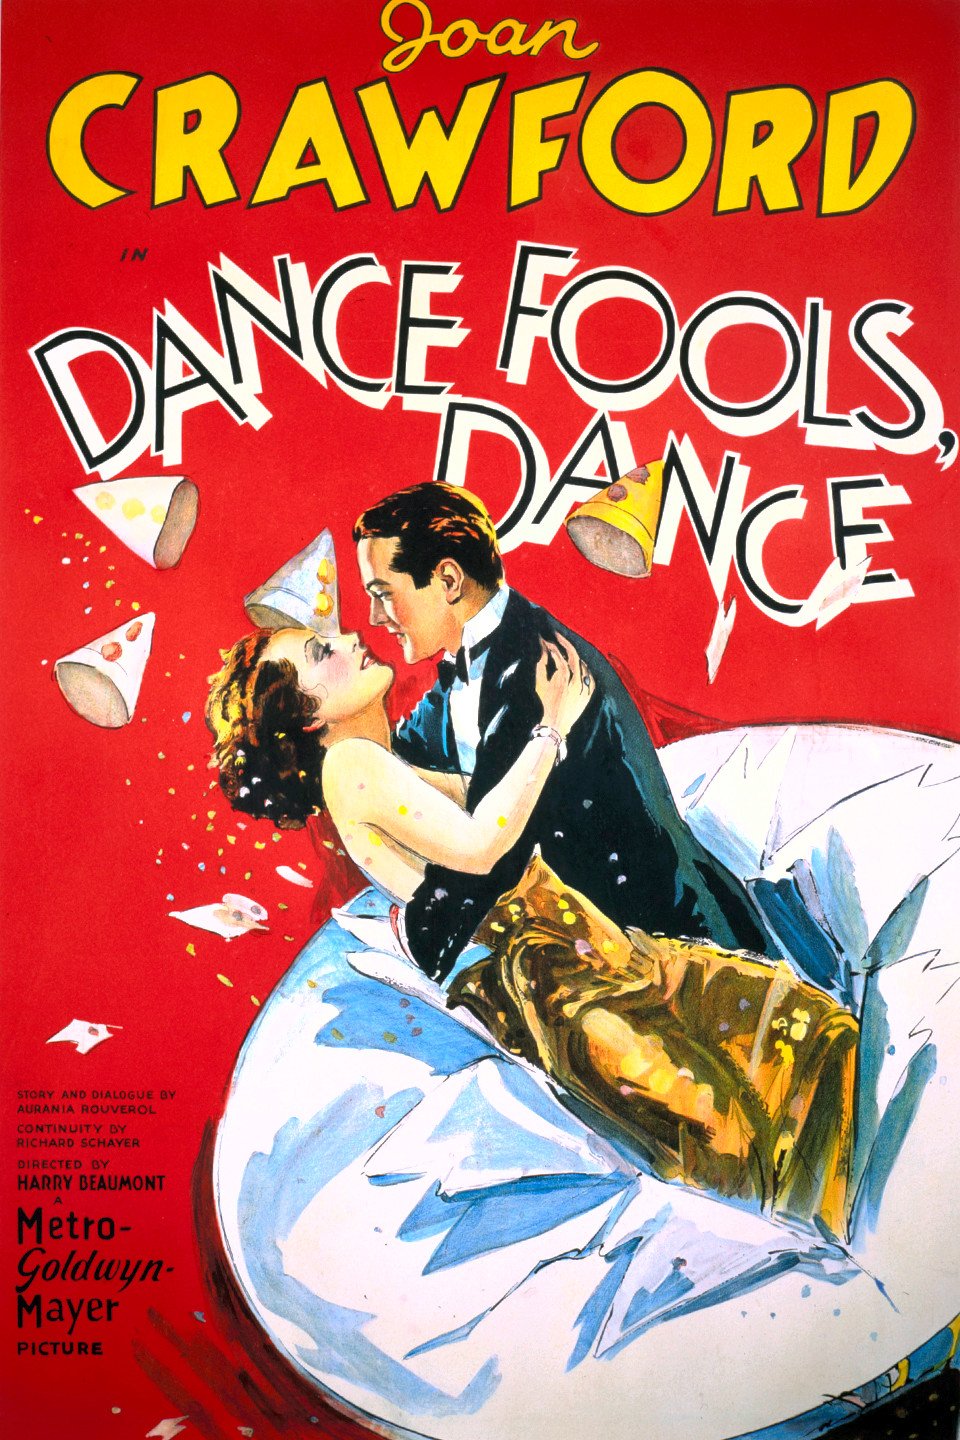 Poster of the movie Dance, Fools, Dance